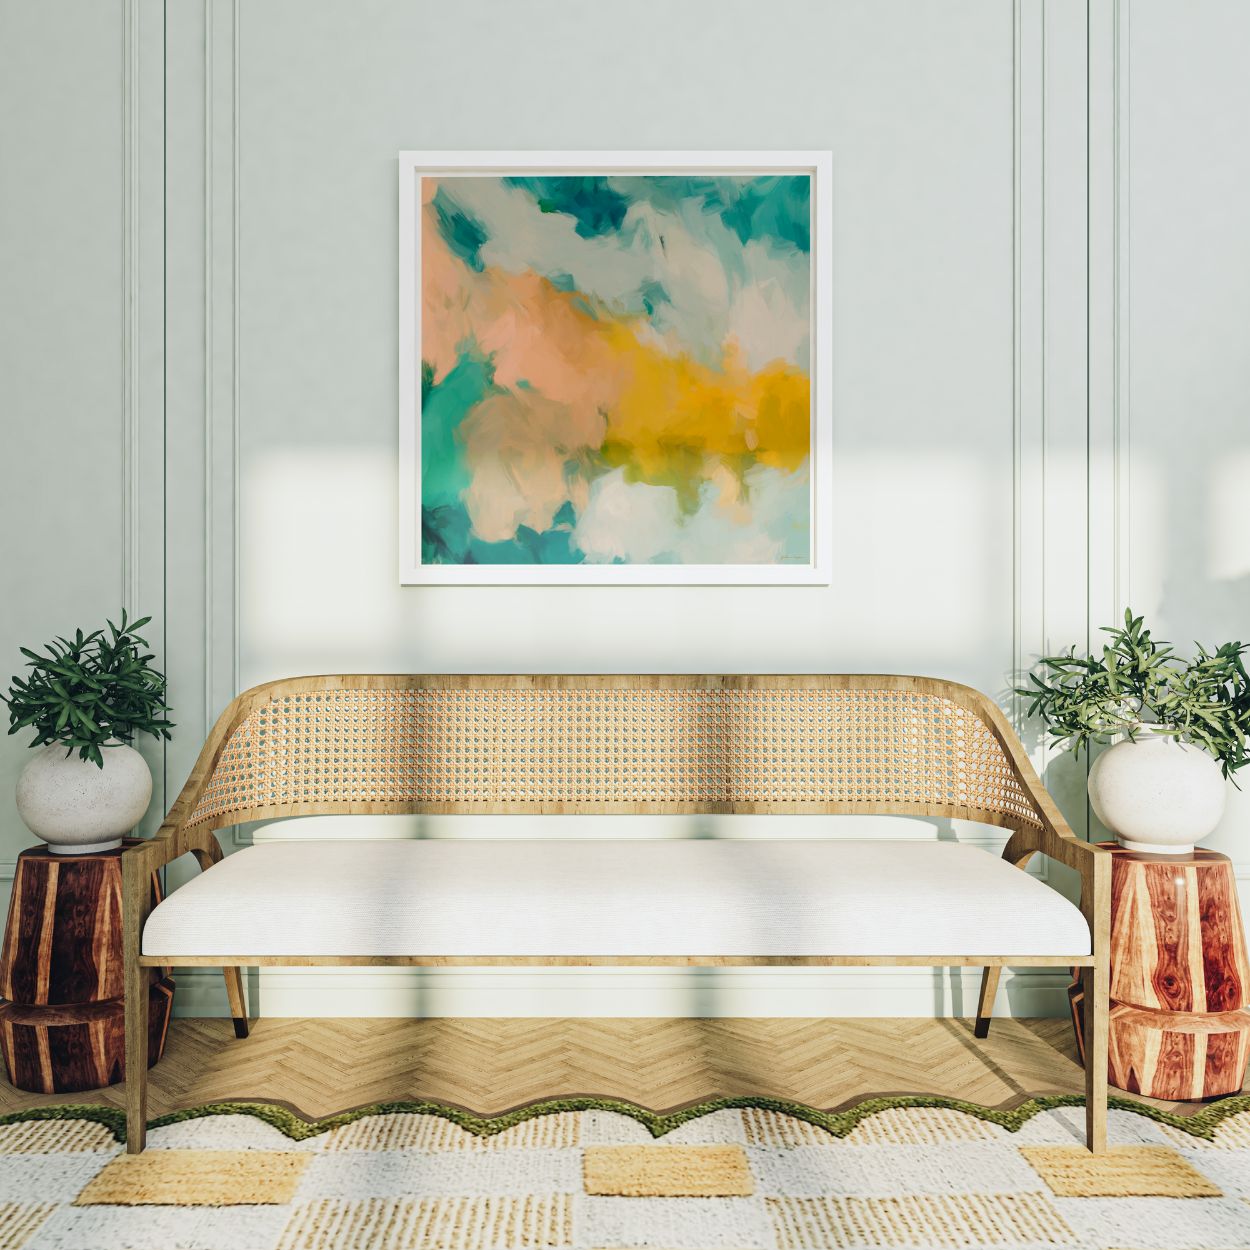 Beach Day, blue and yellow colorful abstract wall art print by Parima Studio. Oversize square art over sofa in living room